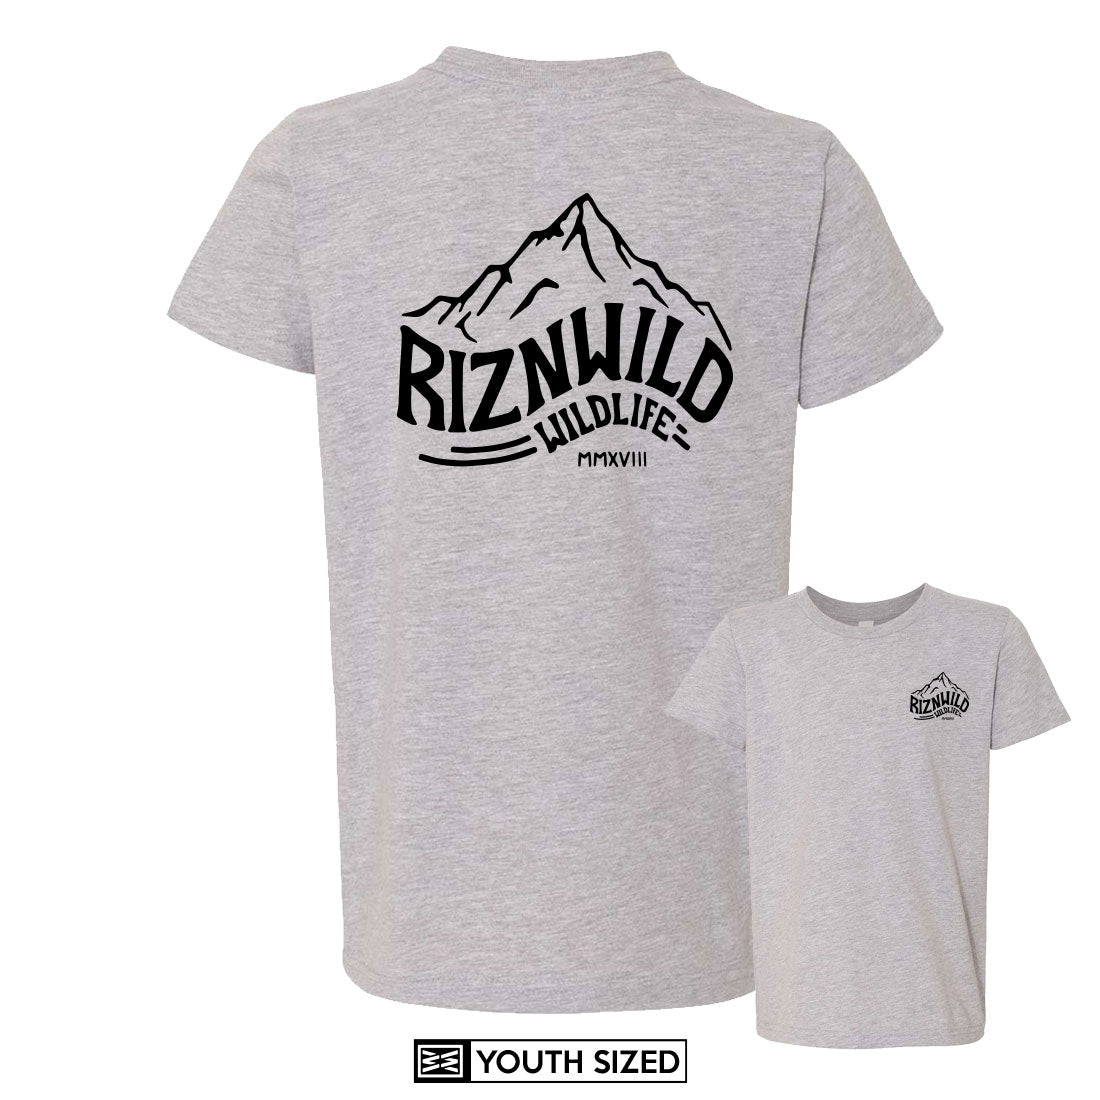 ROCKIES YOUTH TEE IN ATHLETIC HEATHER